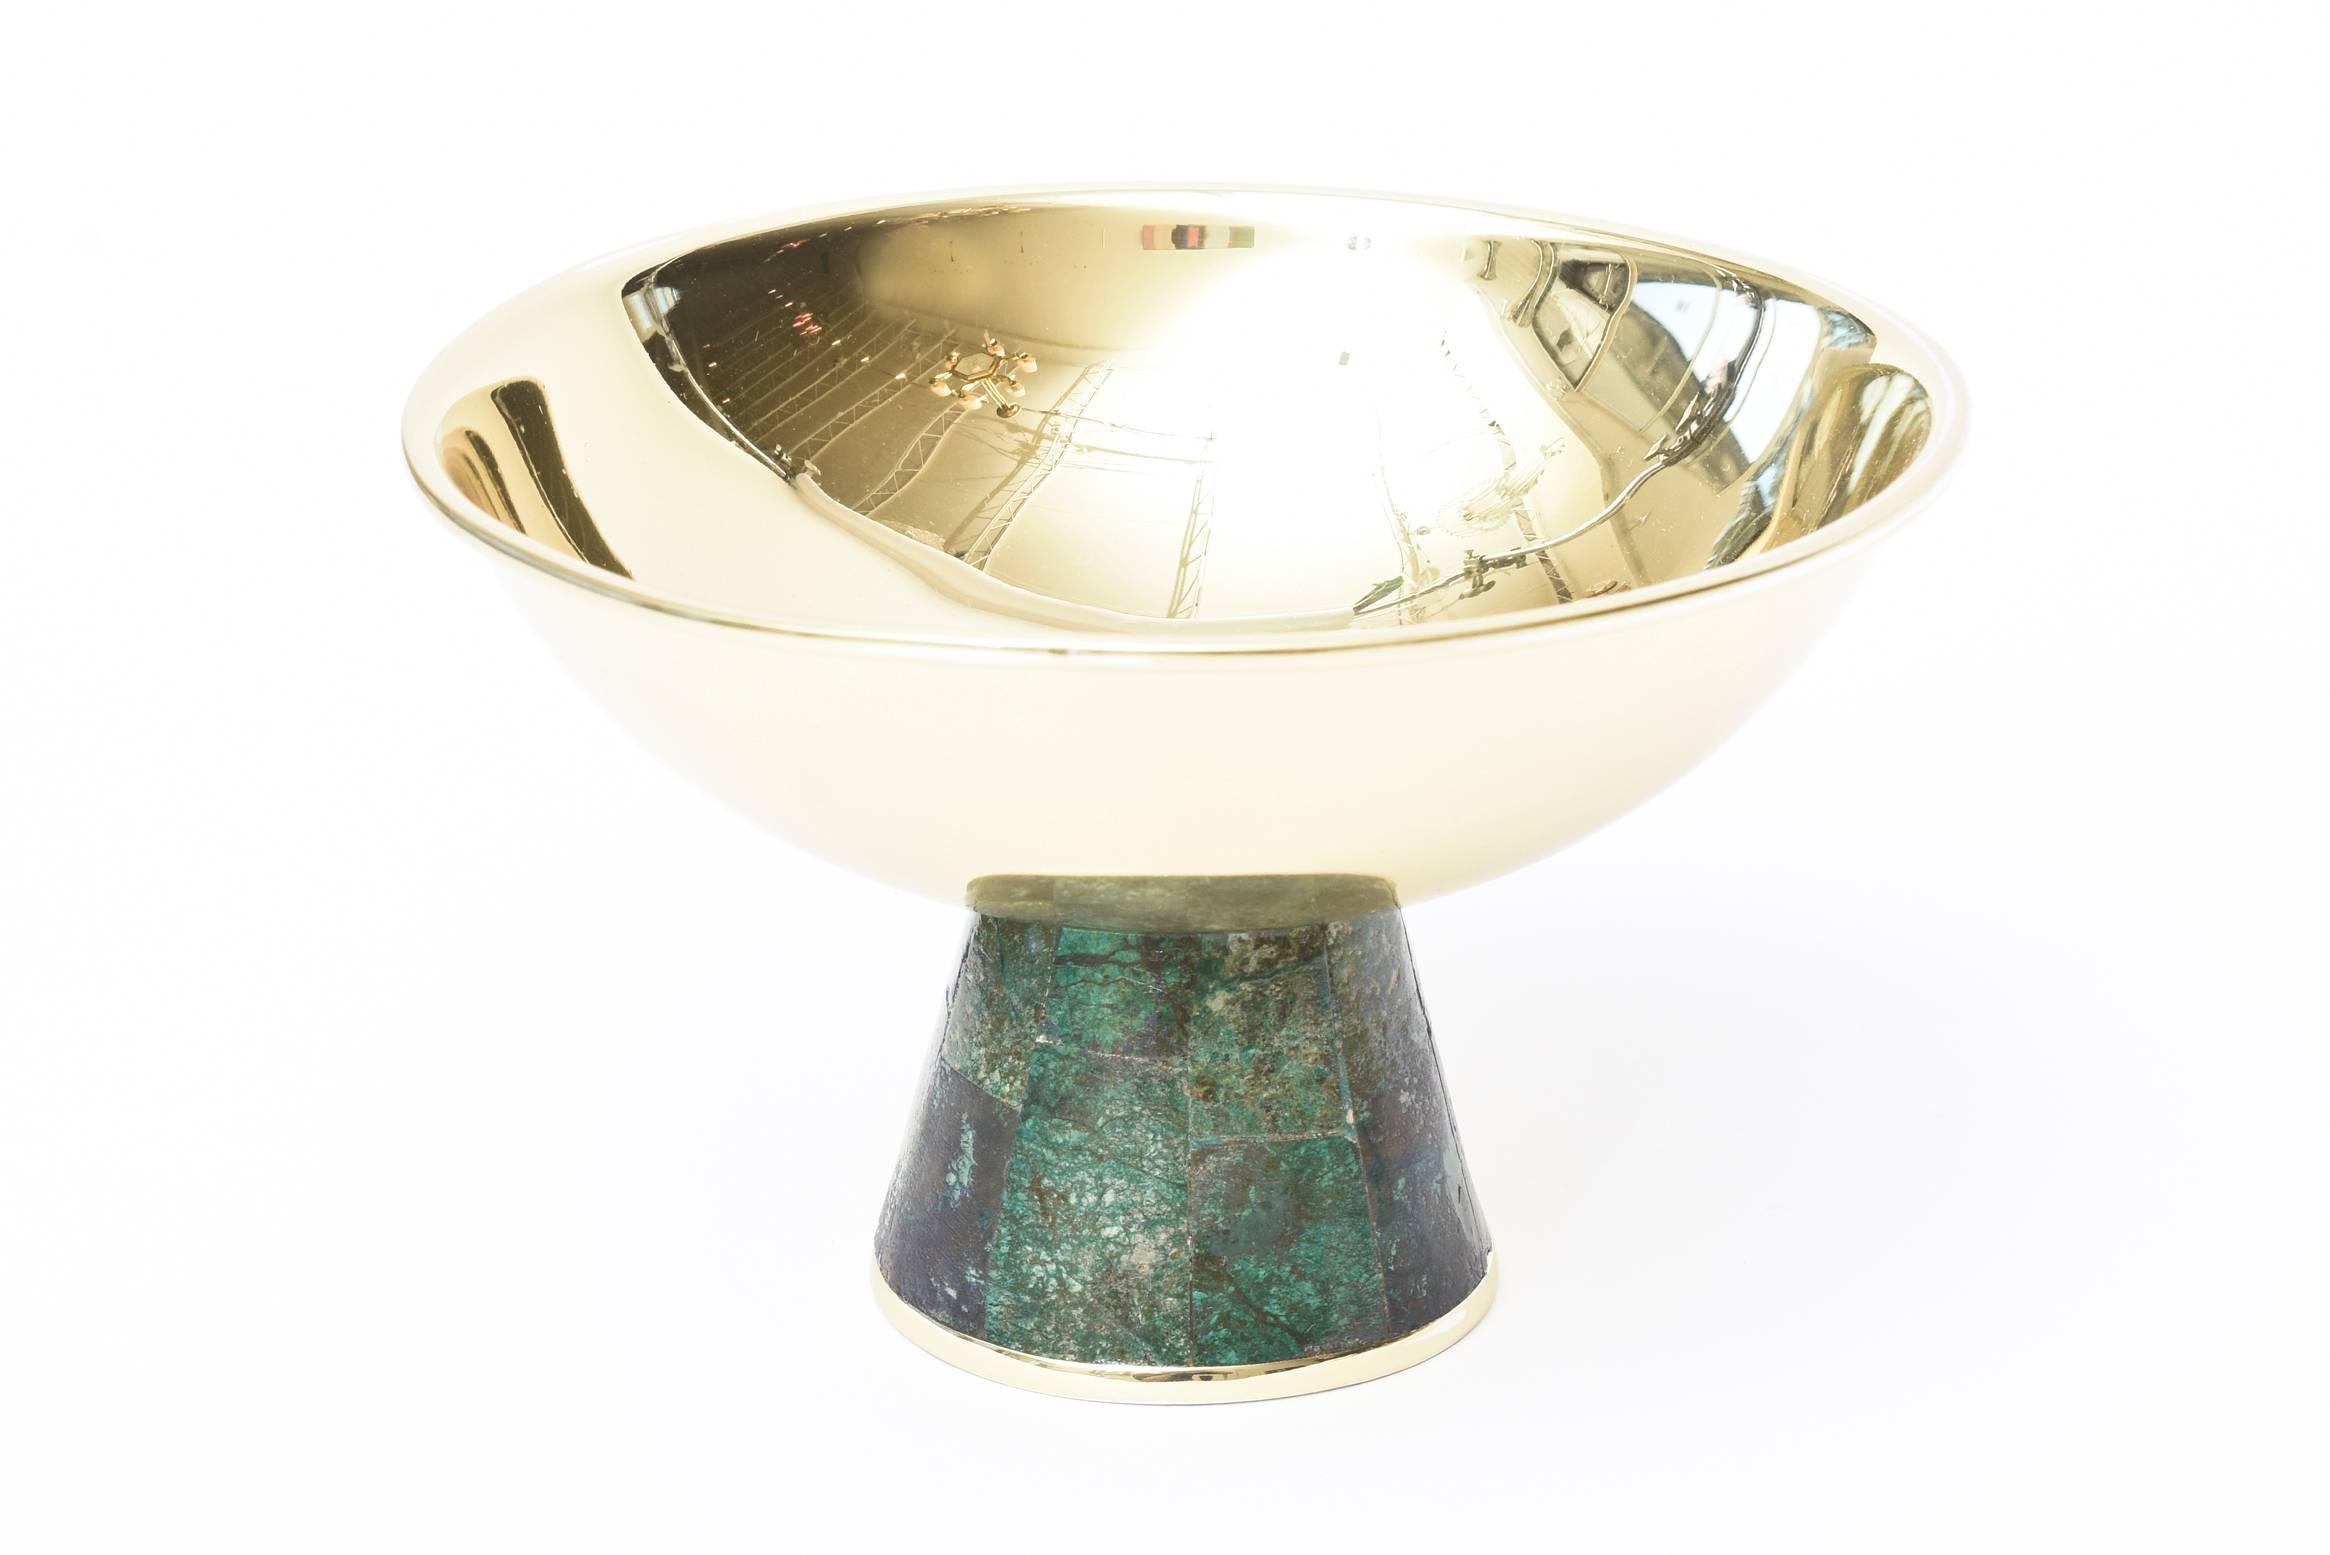 This lovely Mid-Century Modern hallmarked Los Castillo raised tazza bowl is polished brass and the base is sodalite. It is crushed turquoise with other stones from the period. The base also has a brass lip at the bottom. This is a go to bowl that